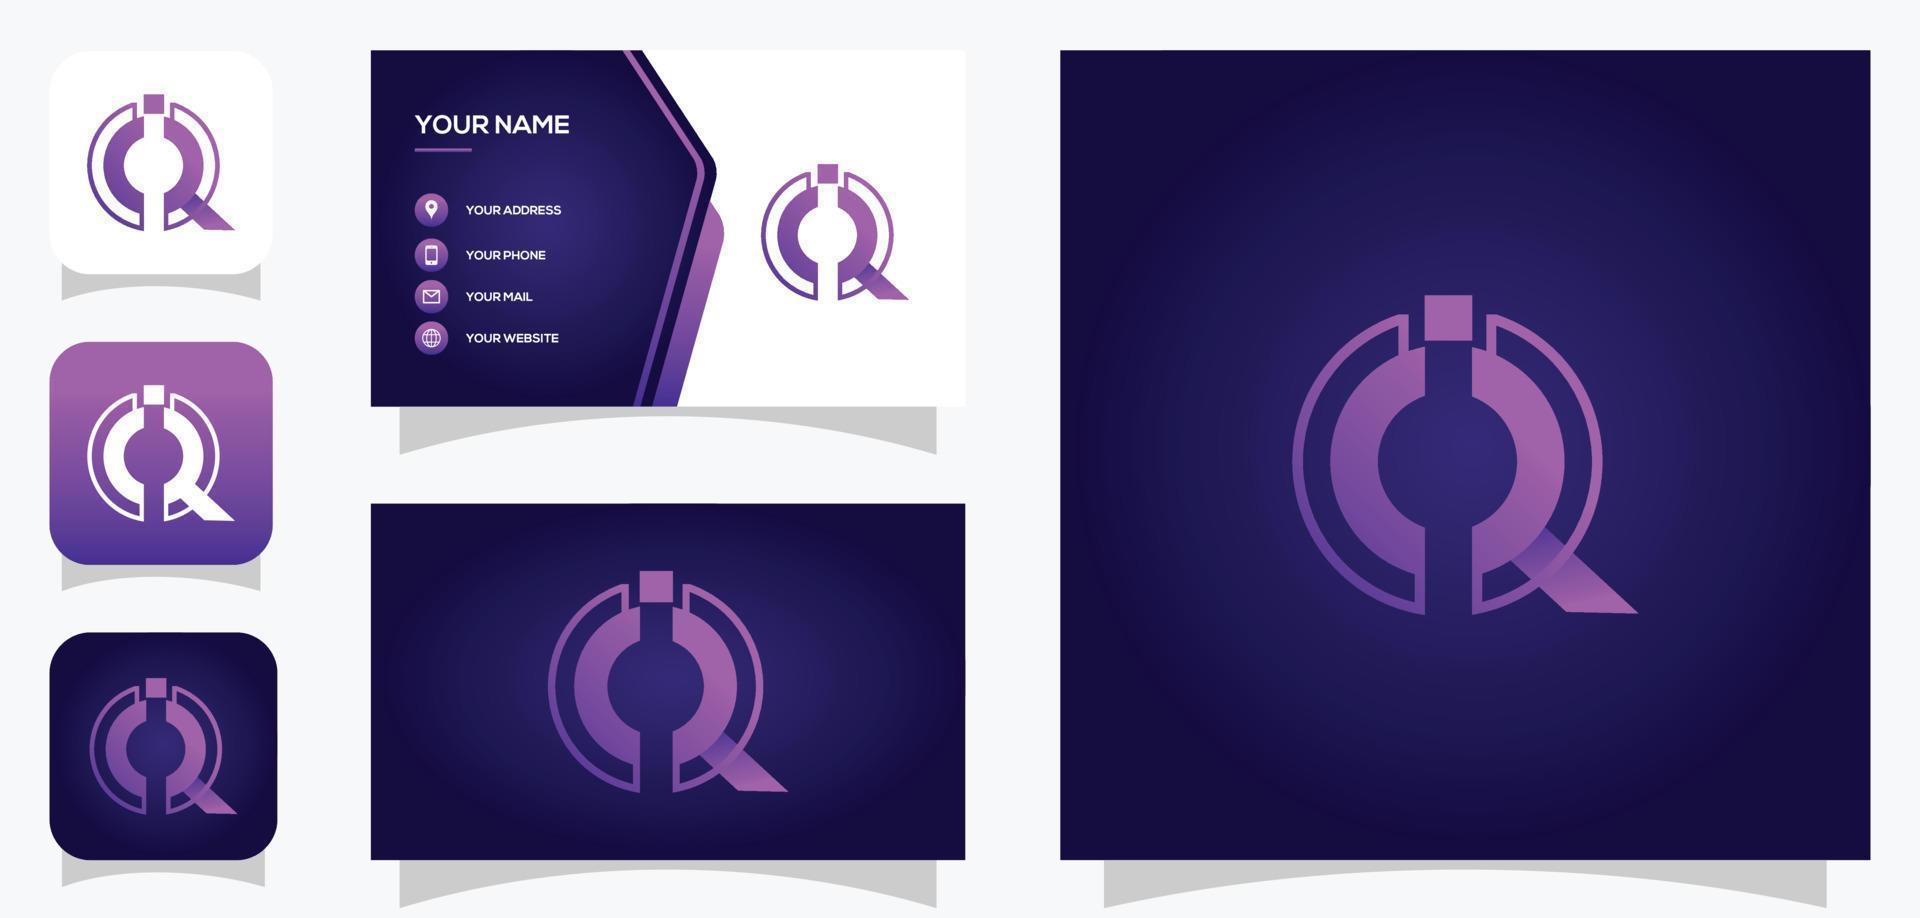 vector graphic of letter I and Q or IQ logo design with modern style and business card